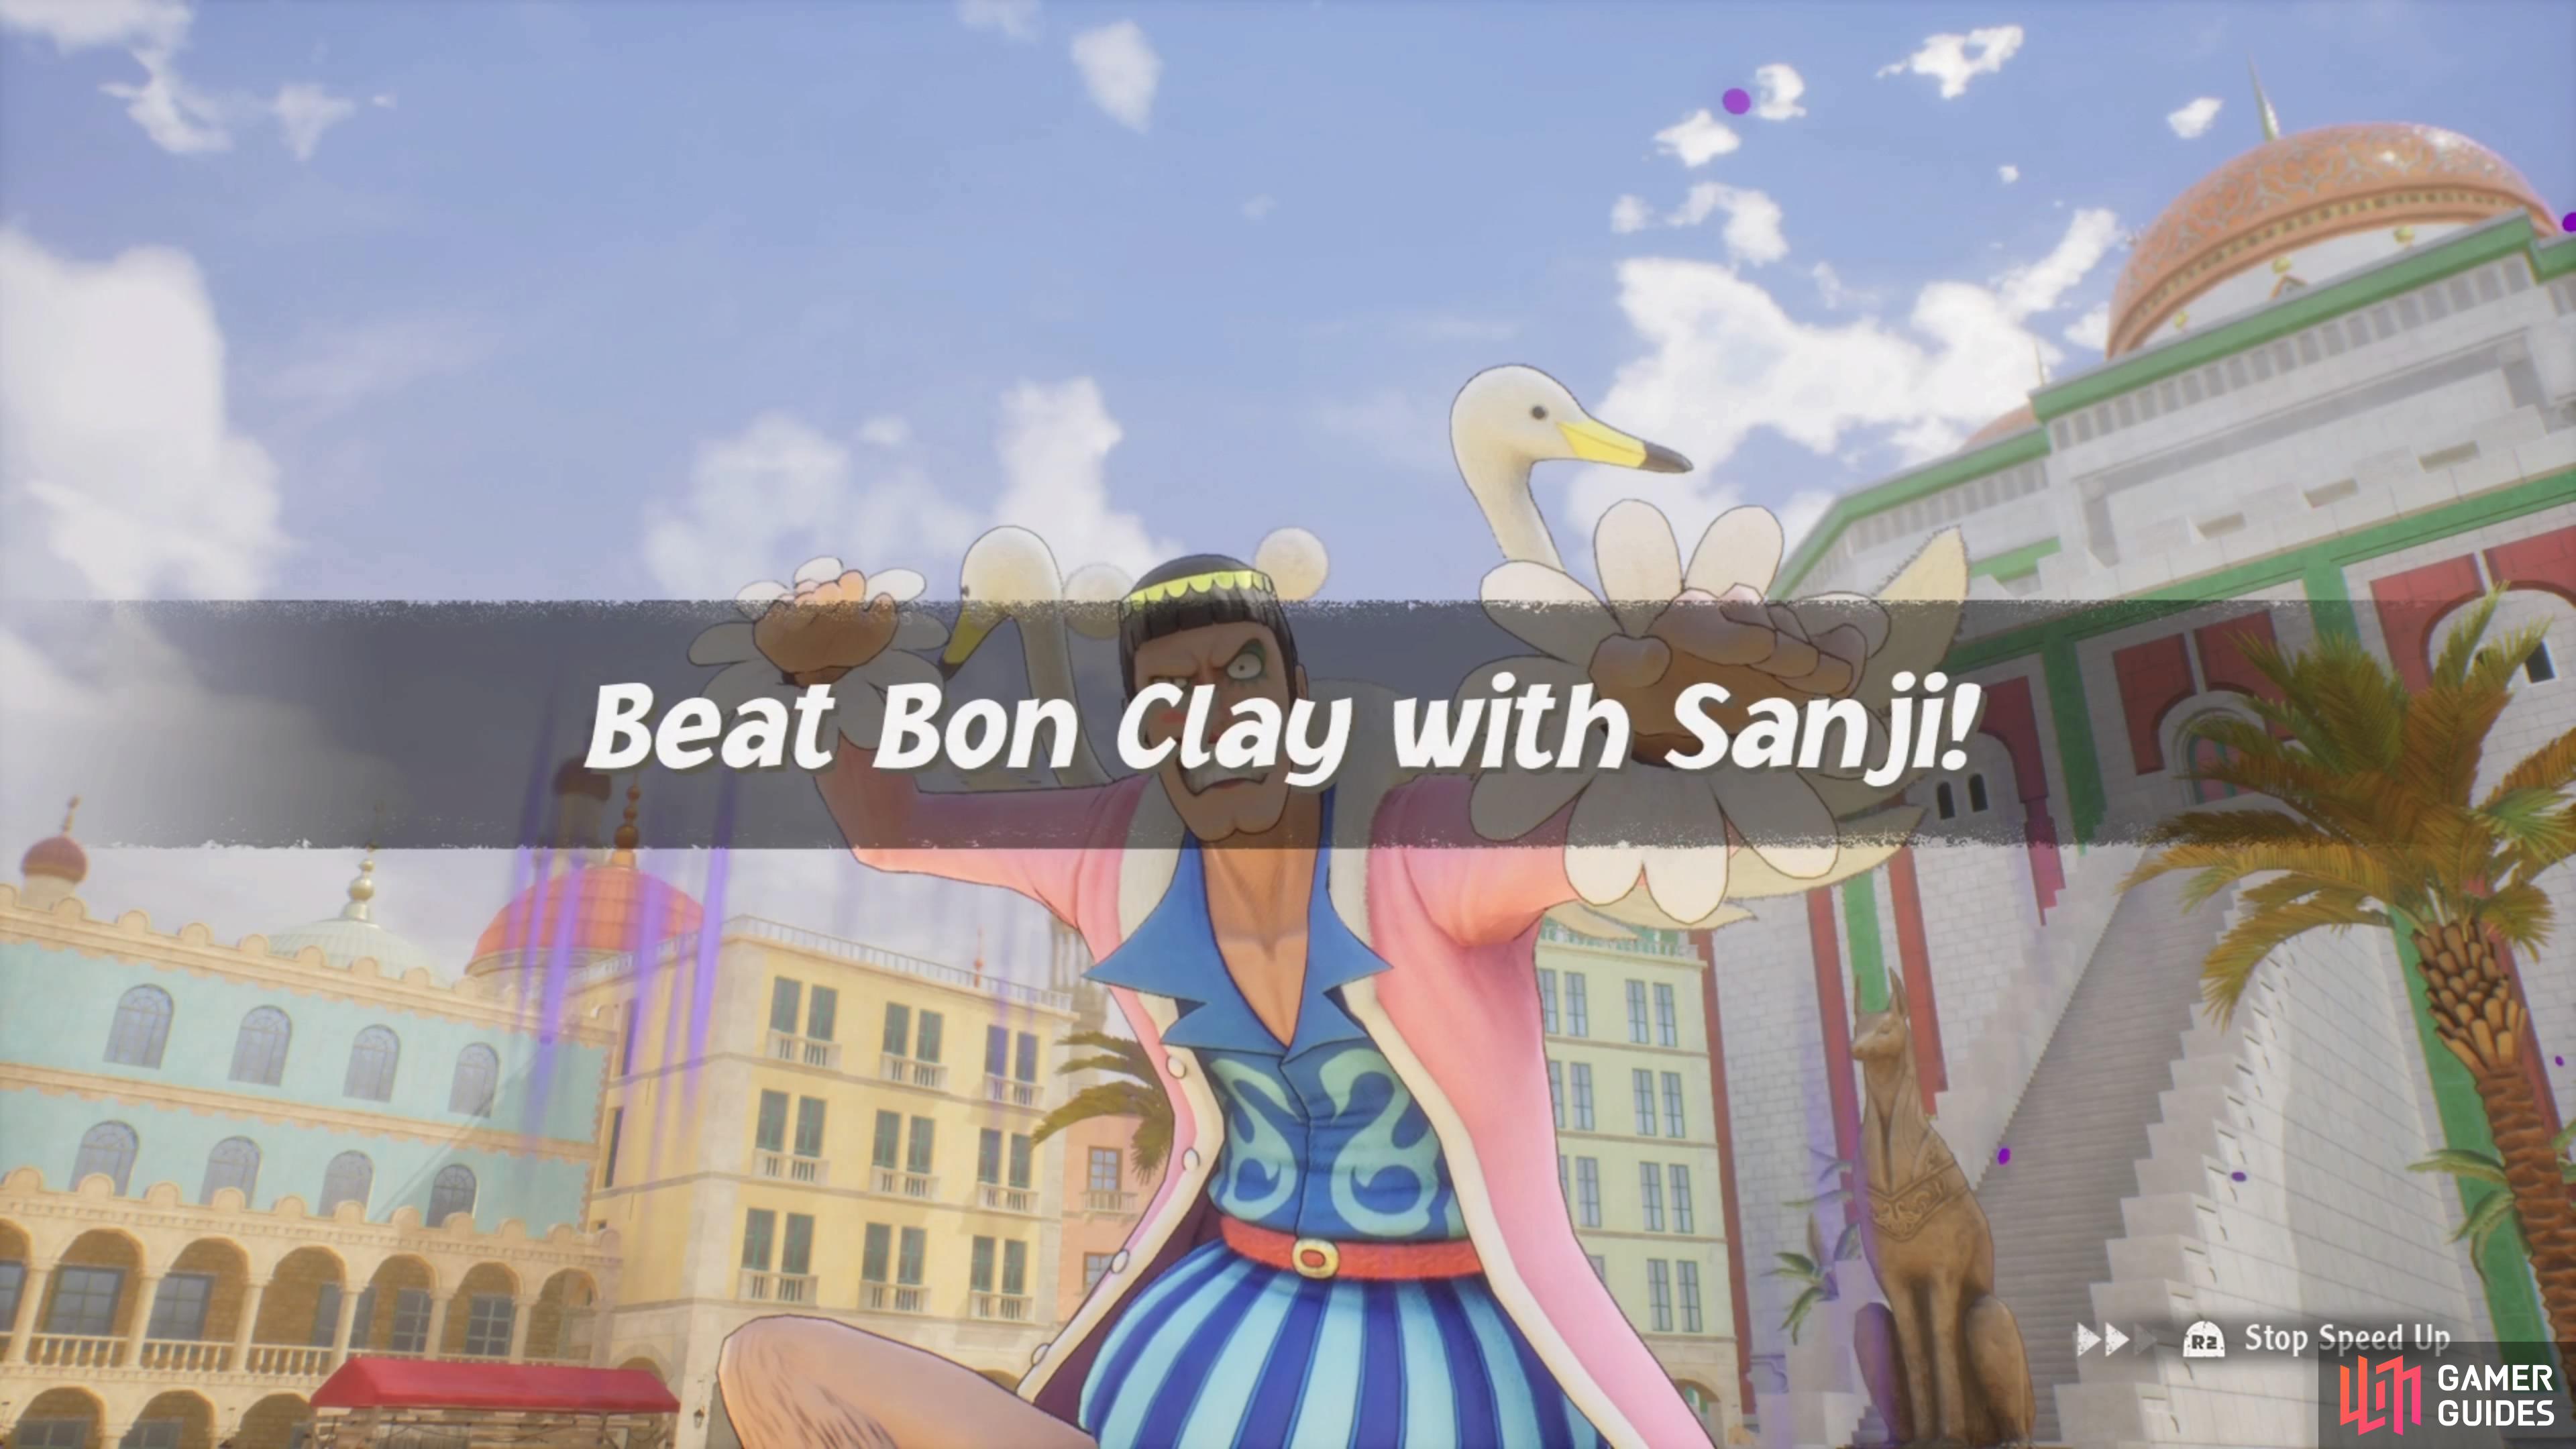 There will be a Dramatic Scene to beat Bon Clay with Sanji